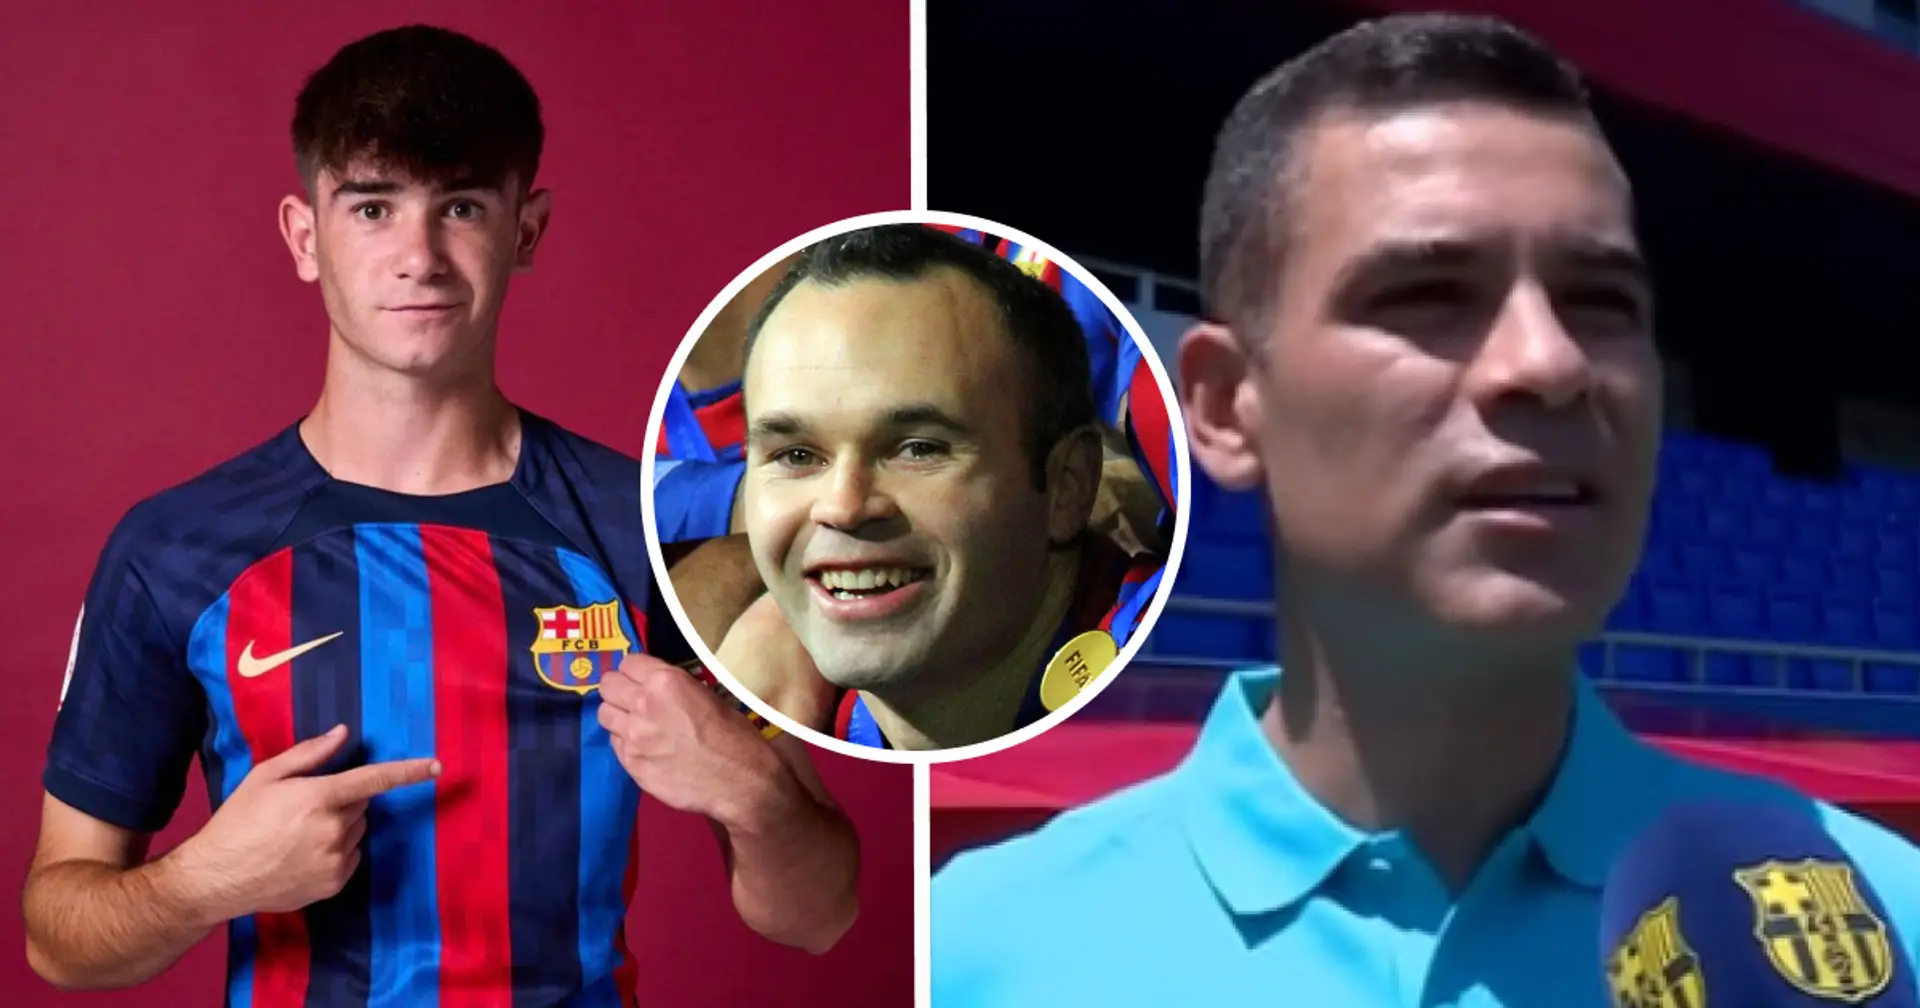 New Barca B coach Rafa Marquez unearths another gem who reminds him of Iniesta